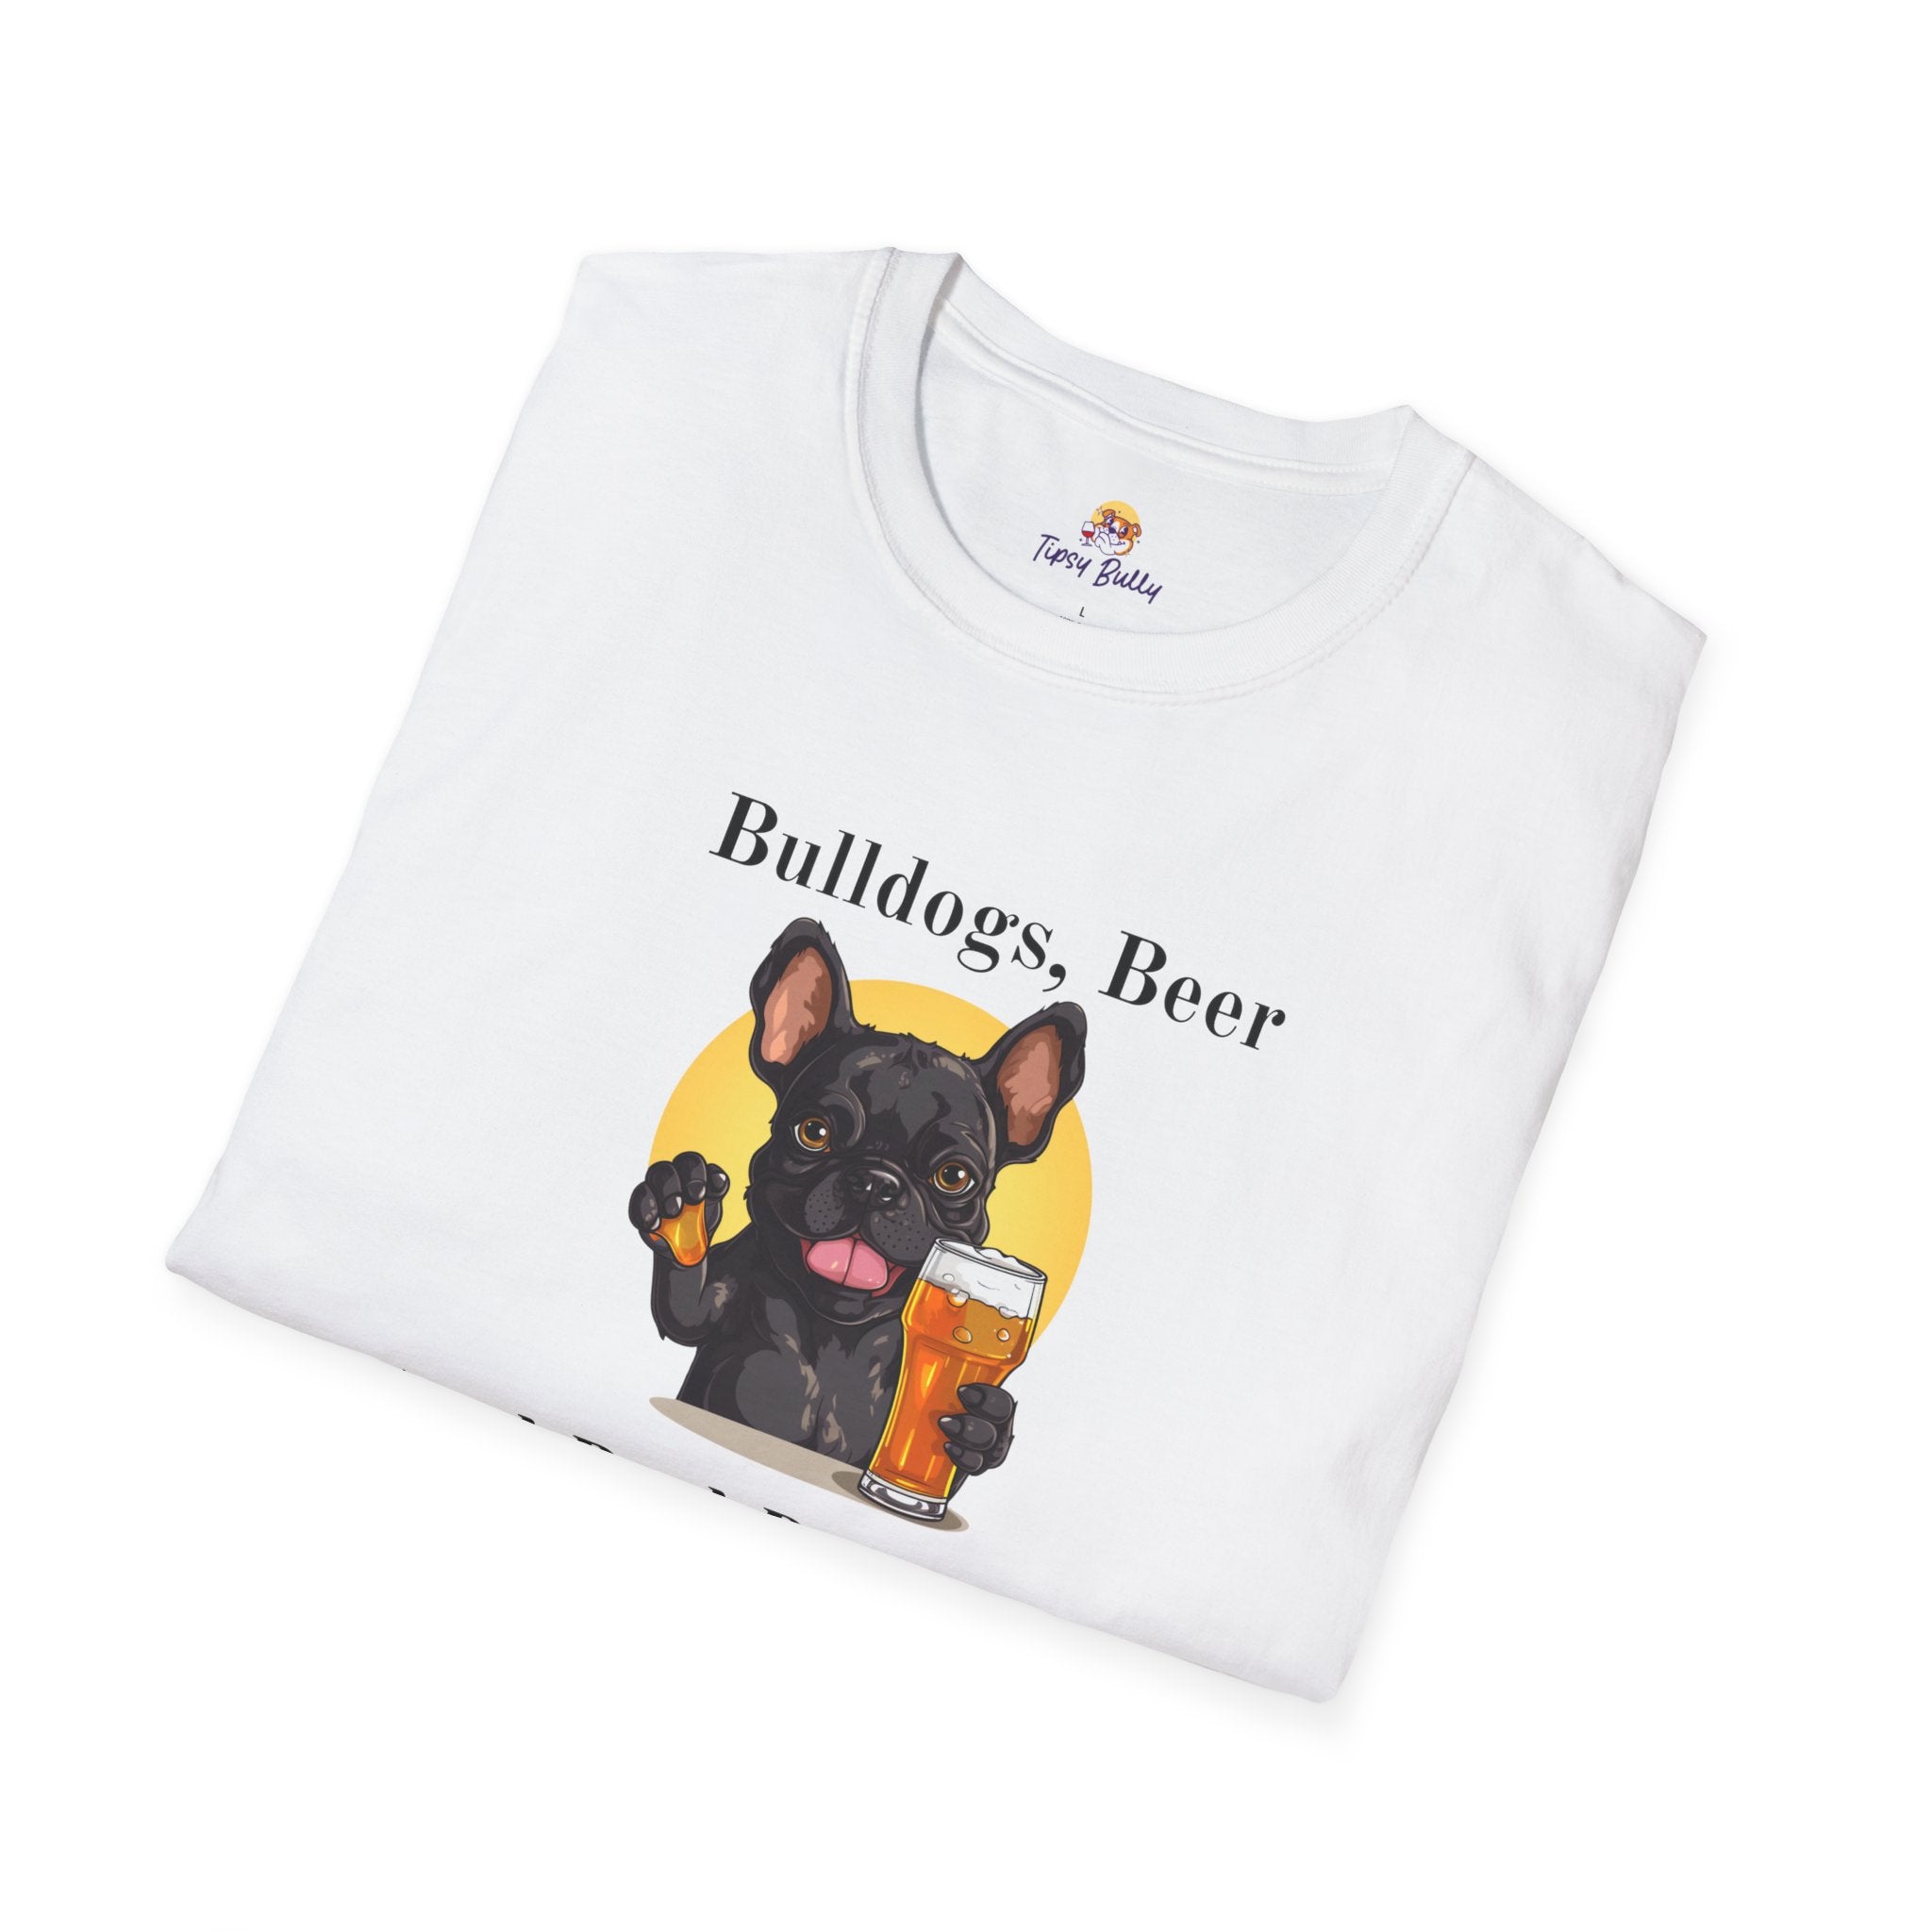 Bulldogs, Beer, and Bad Decisions" Unisex T-Shirt by Tipsy Bully (French/Black)